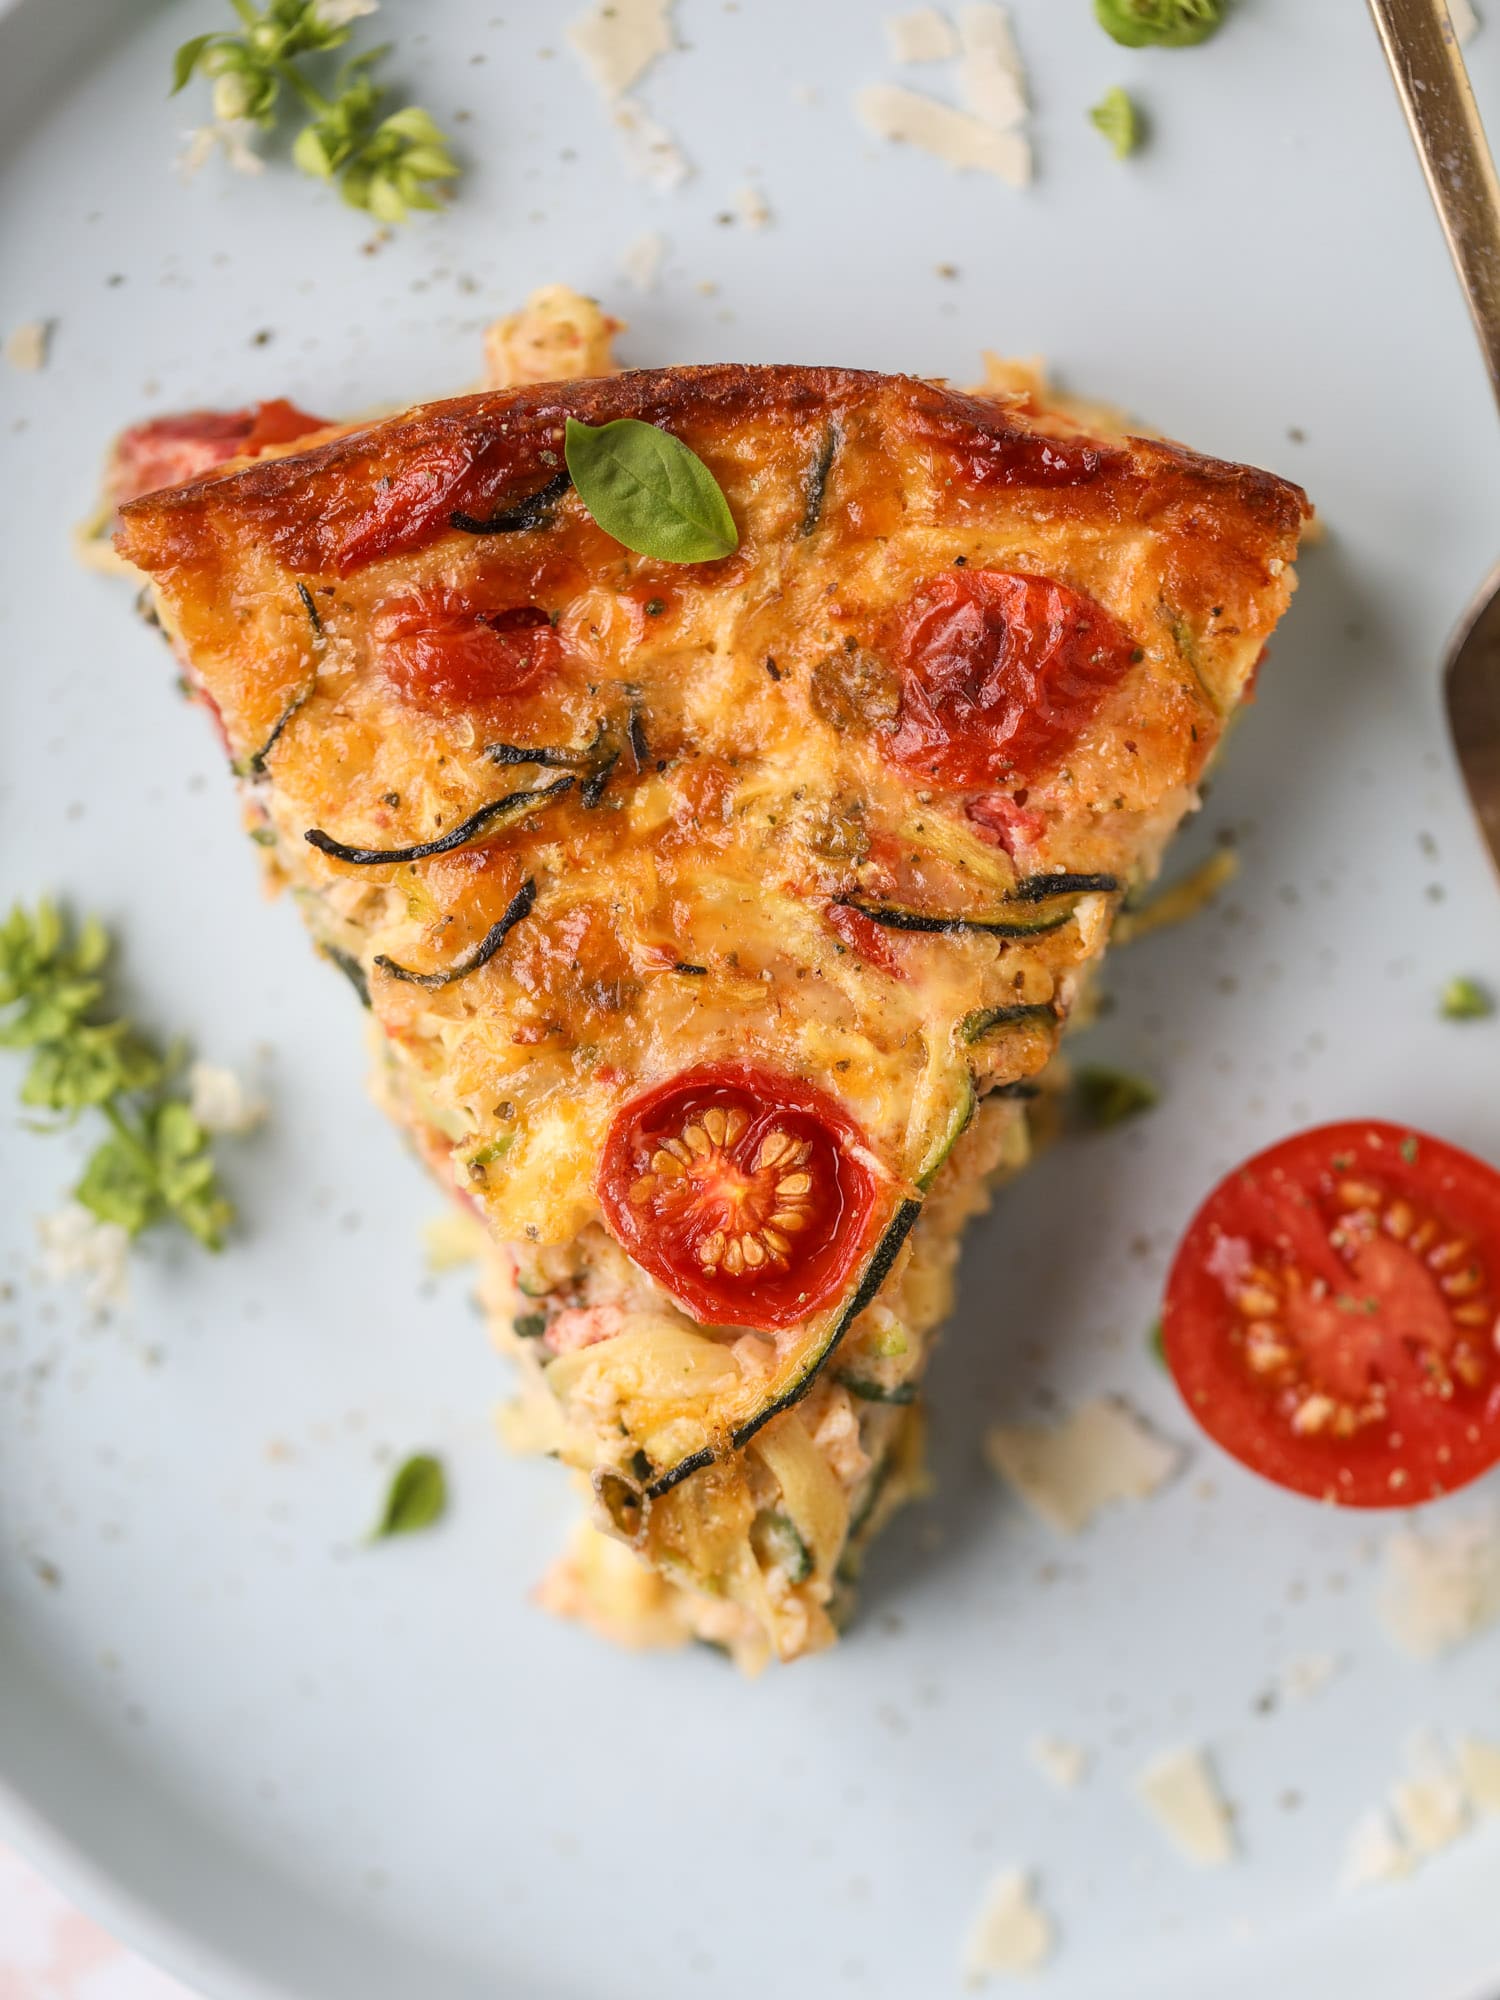 This zucchini pie recipes is absolutely divine and perfect for breakfast or dinner! Completely with garlic and blistered tomatoes, it combines cheese and egg to make a to-die-for frittata-like dish that can be eaten hot or cold! I howsweeteats.com #zucchini #pie #tomatoes #eggs #recipes #garden #summer